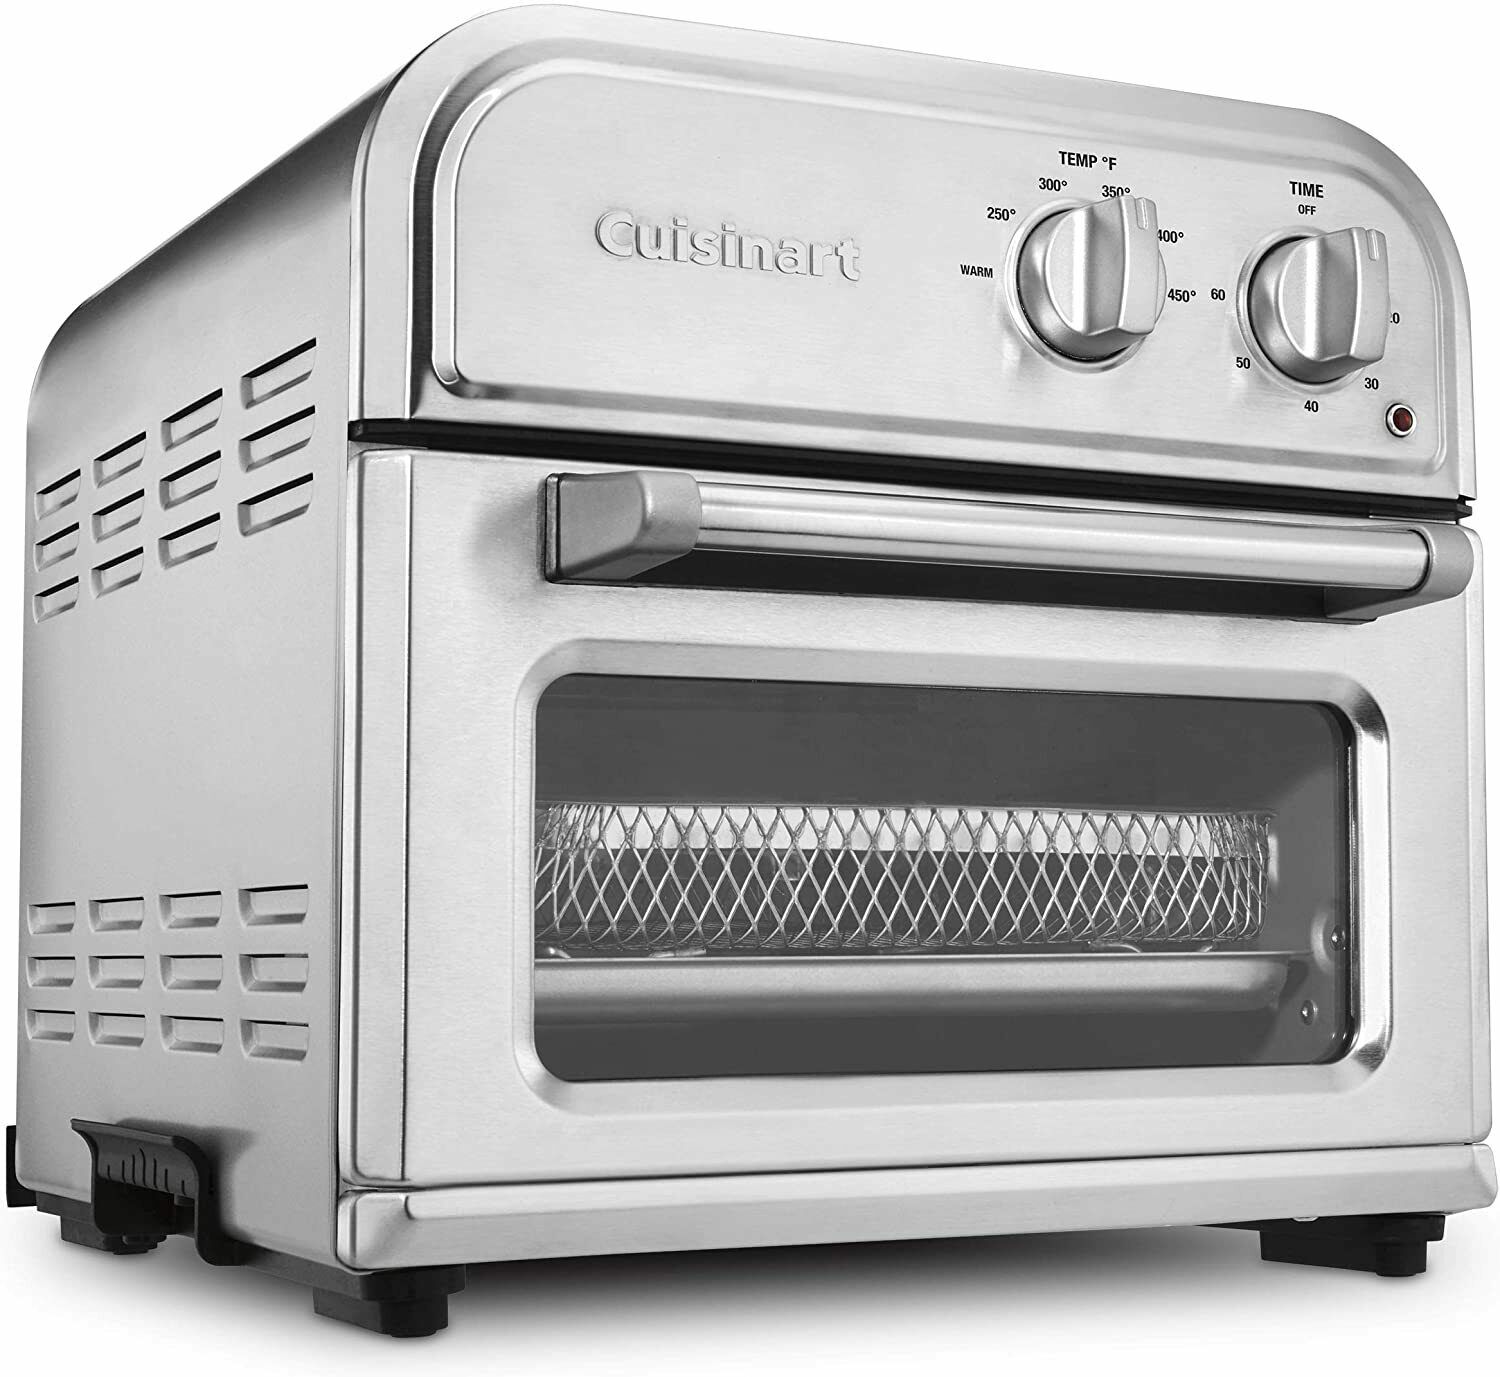 Cuisinart AFR-25 Compact Air Fryer - Brushed Stainless Steel - image 2 of 5